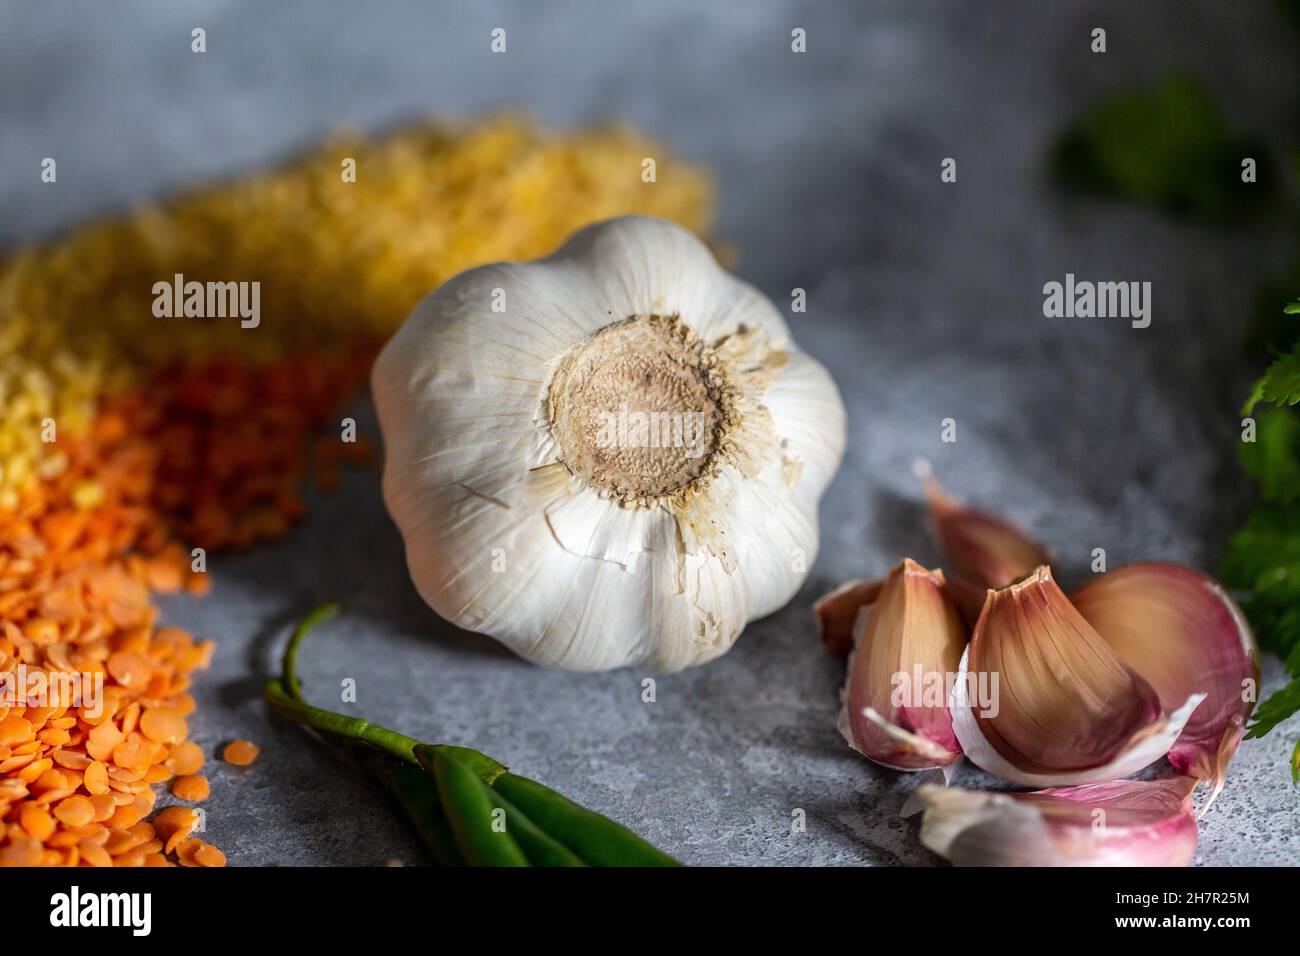 Ingredients for cooking Asain cuisine against a grey background Stock Photo